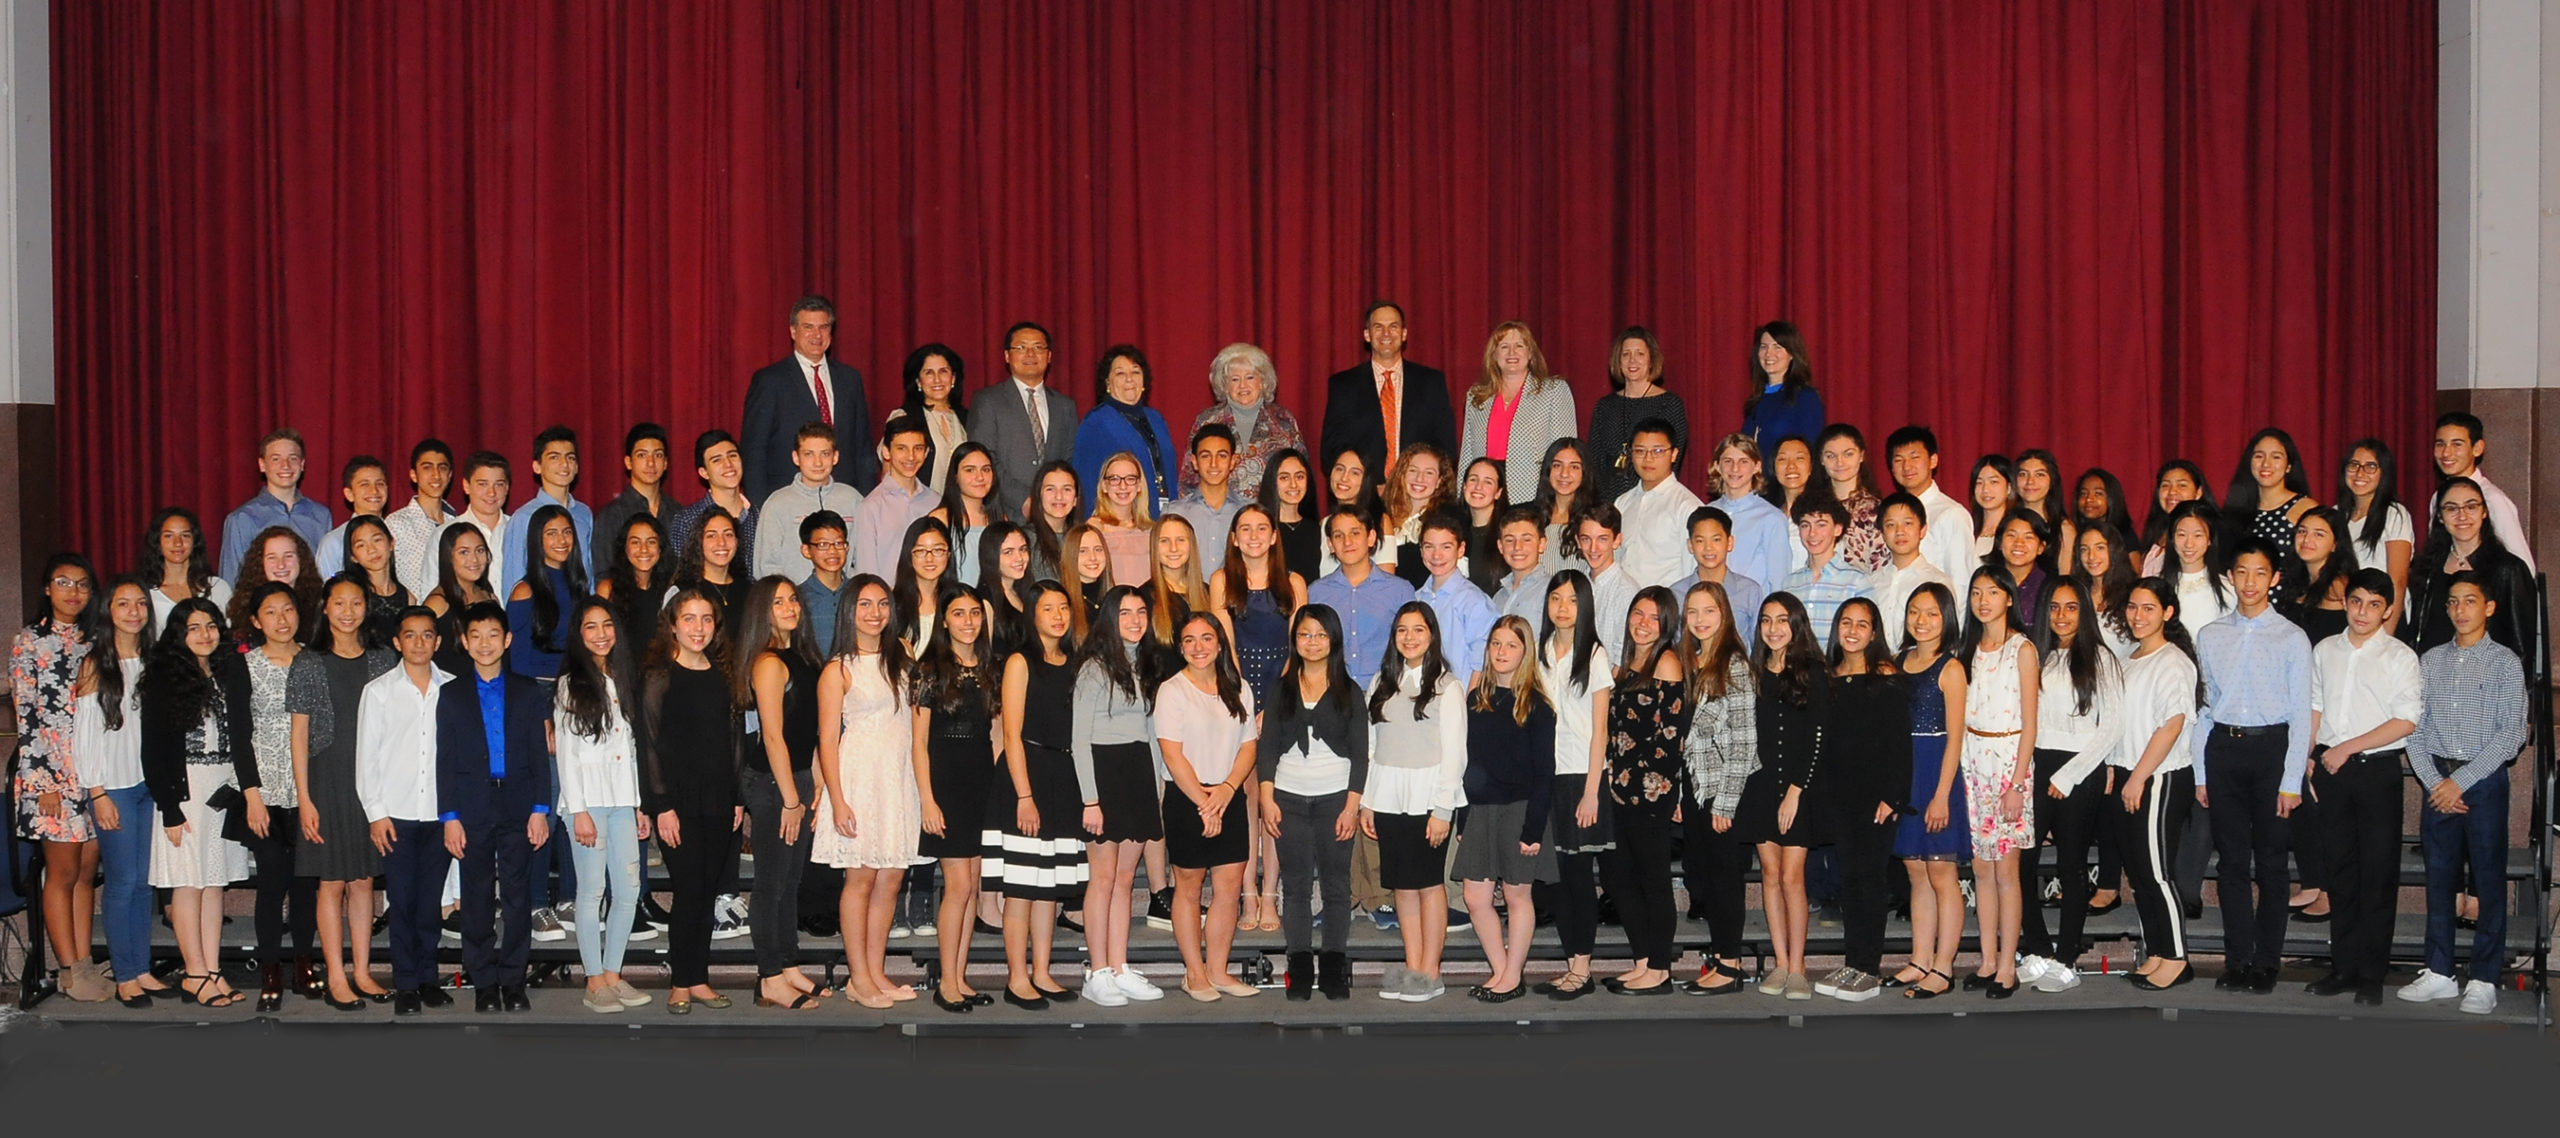 North Middle students were recognized by the Board of Education. (Photo by Irwin Mendlinger)